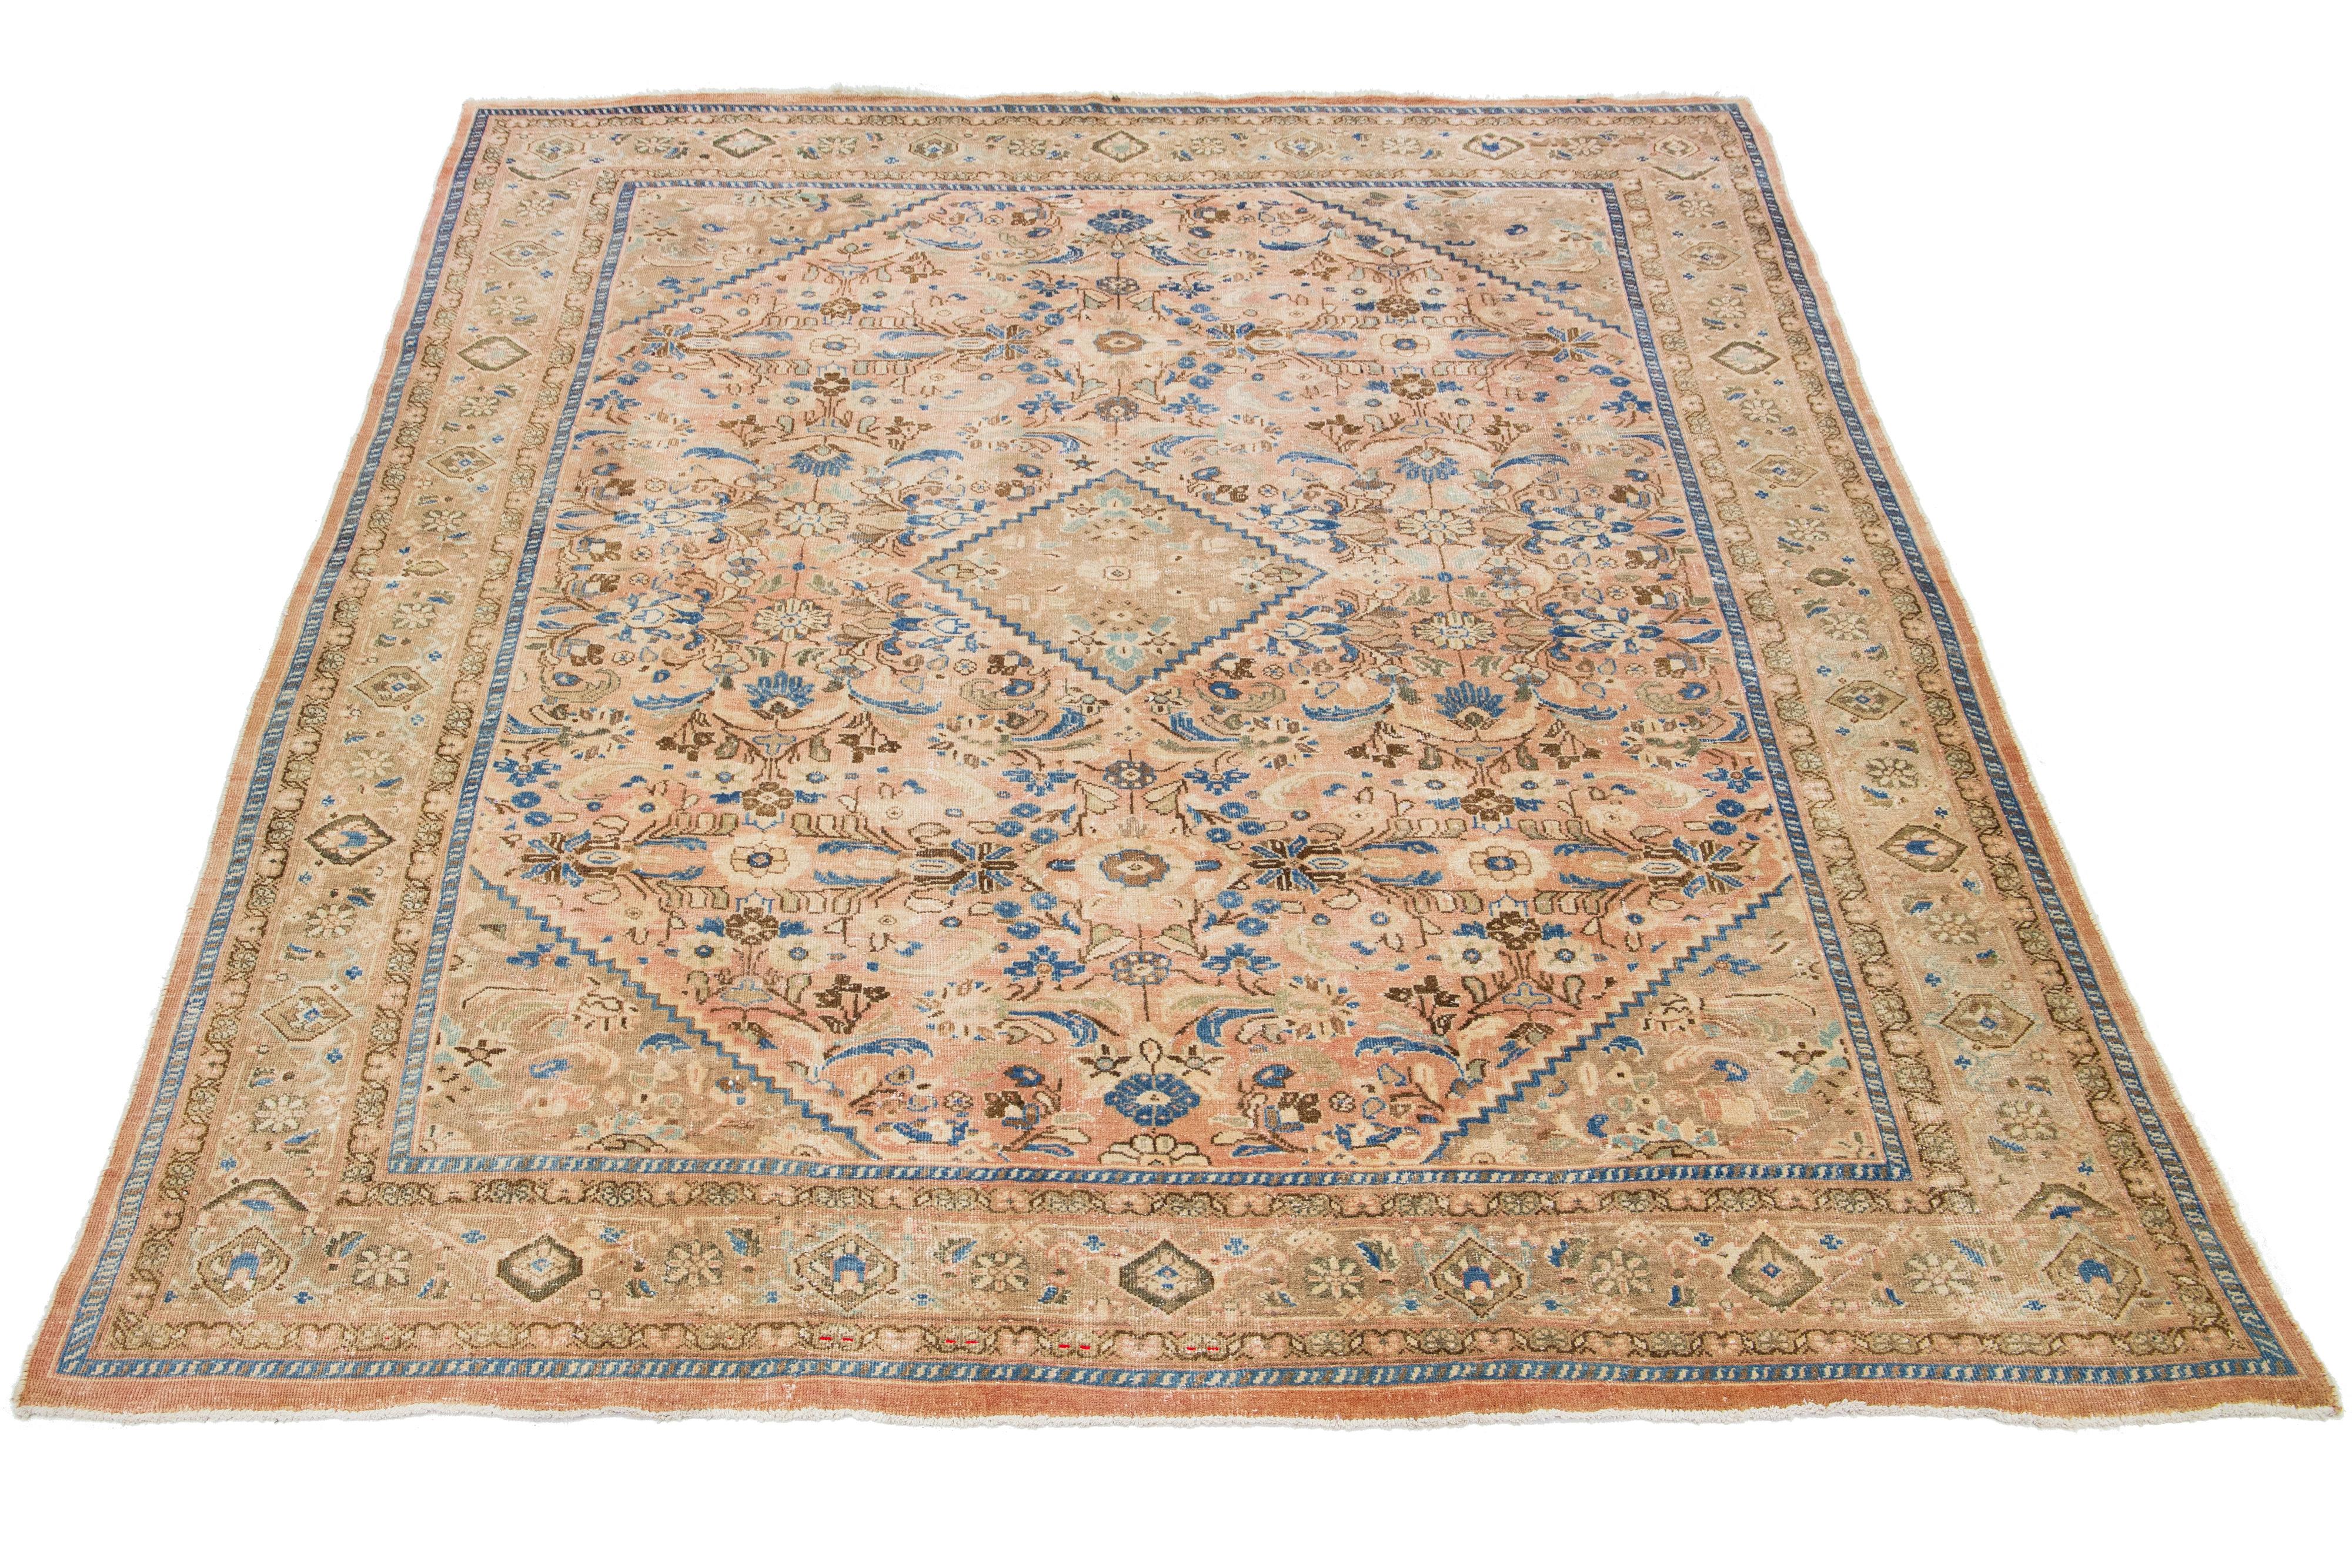 Beautiful antique Mahal hand-knotted wool rug with a peach color field. This Persian rug has blue and brown hues throughout the floral motif.

This rug measures 9'8